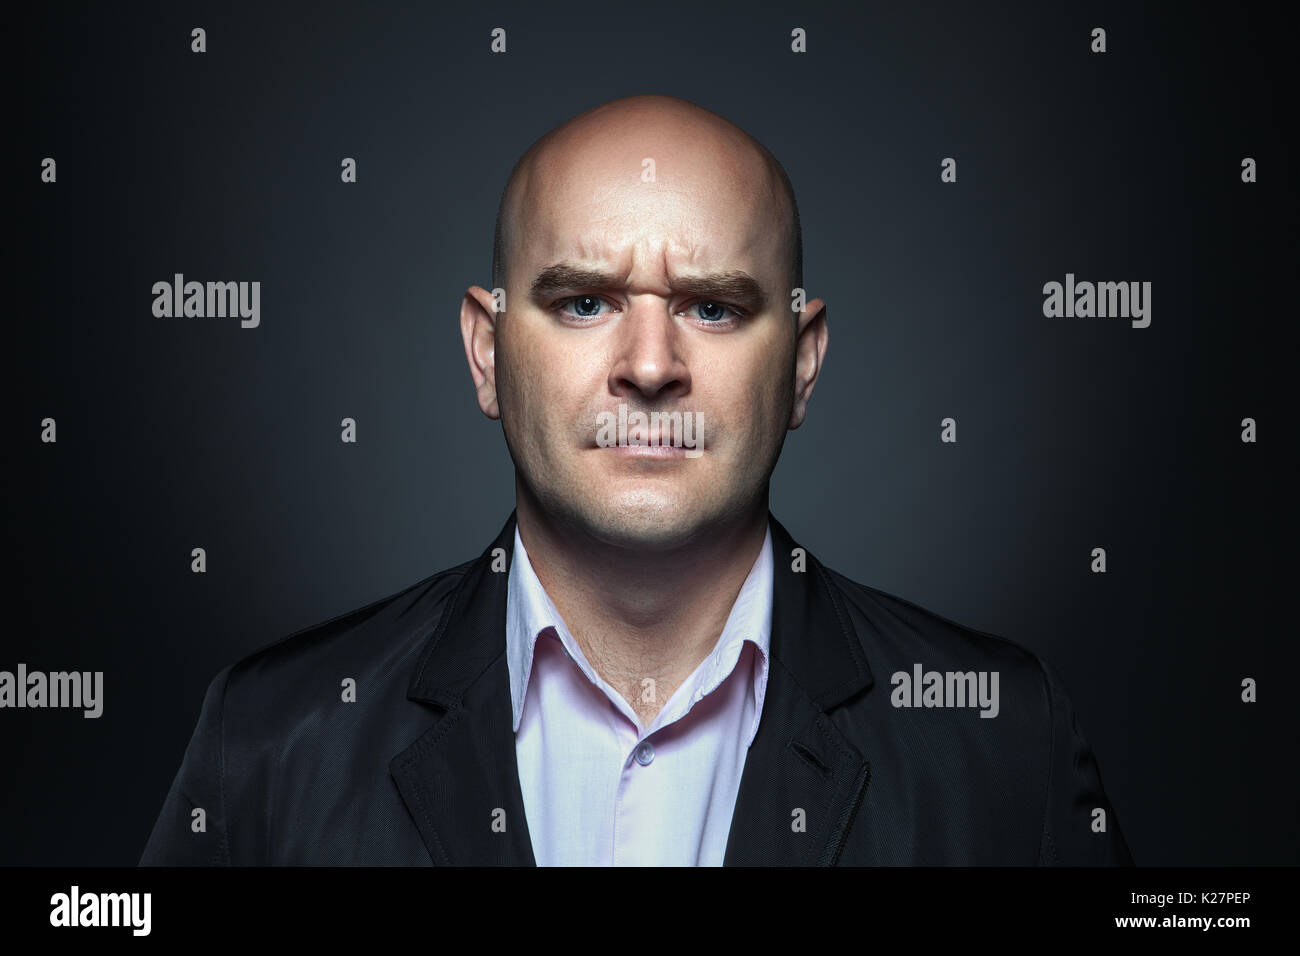 Portrait of a man with angry expression Stock Photo